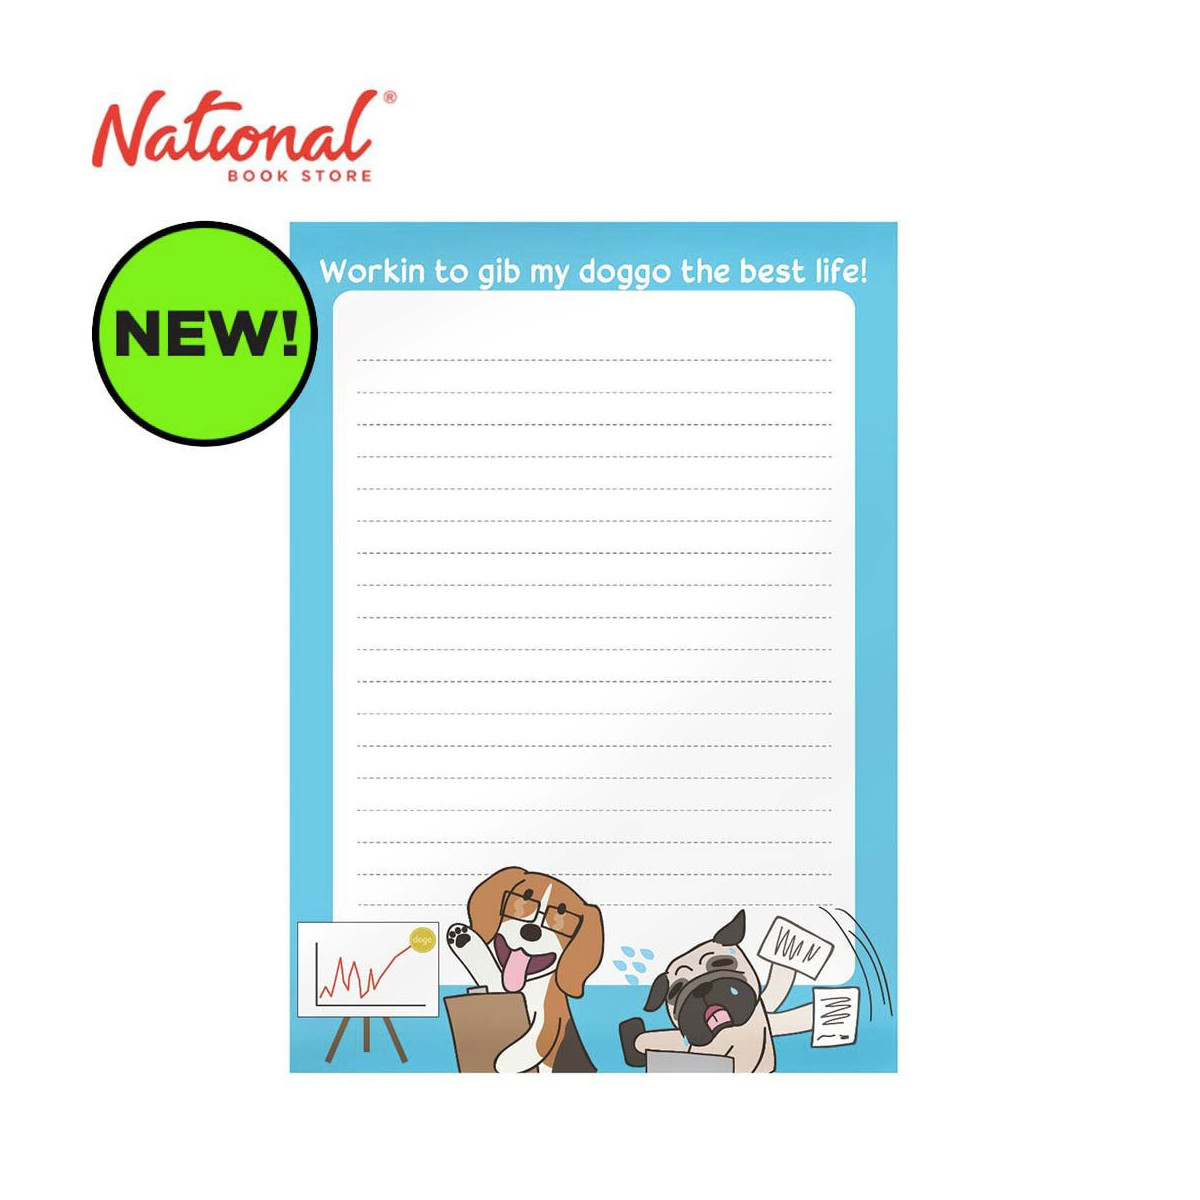 Notepad 5x7 inches Jumbo Relatable 50 Leaves Office Dogs - Office & School Supplies